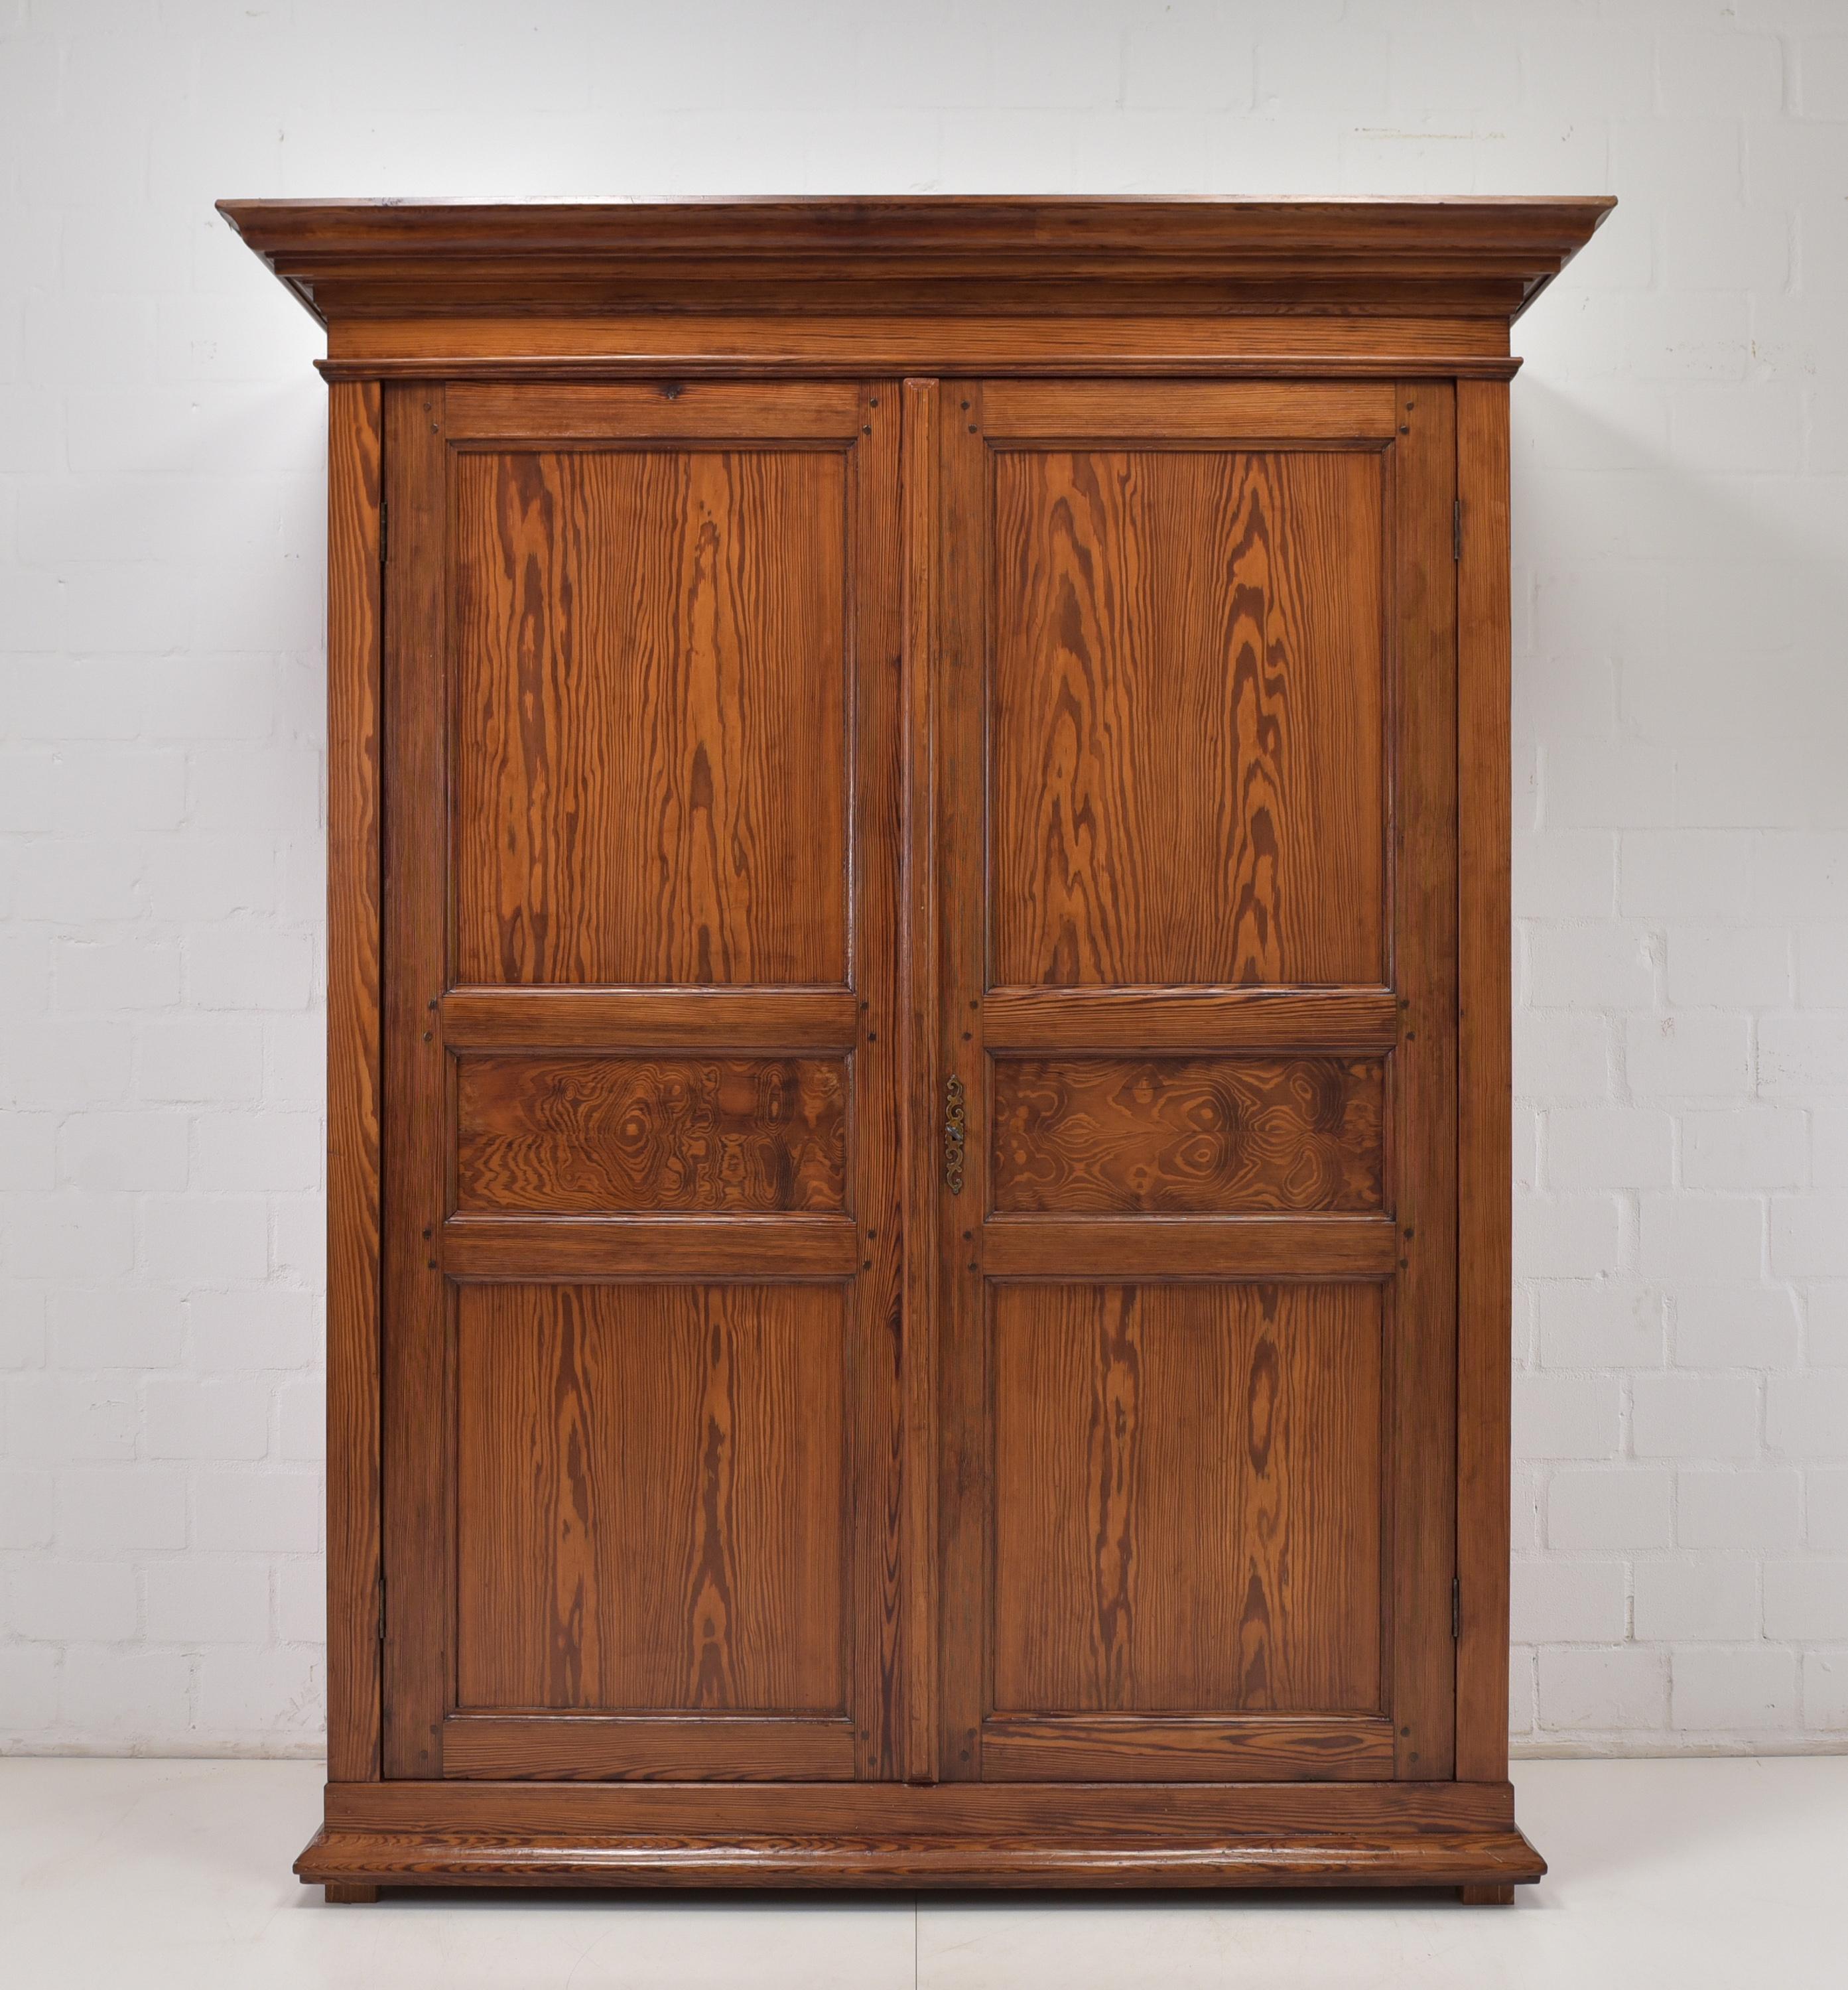 Hallway closet restored Gründerzeit around 1880 Pitchpine closet

Features:
Two-door model with clothes rail and side hooks in the middle and at the top
High quality
Drawers pronged
Visible wood joints
Very nice grain
Quite factual,